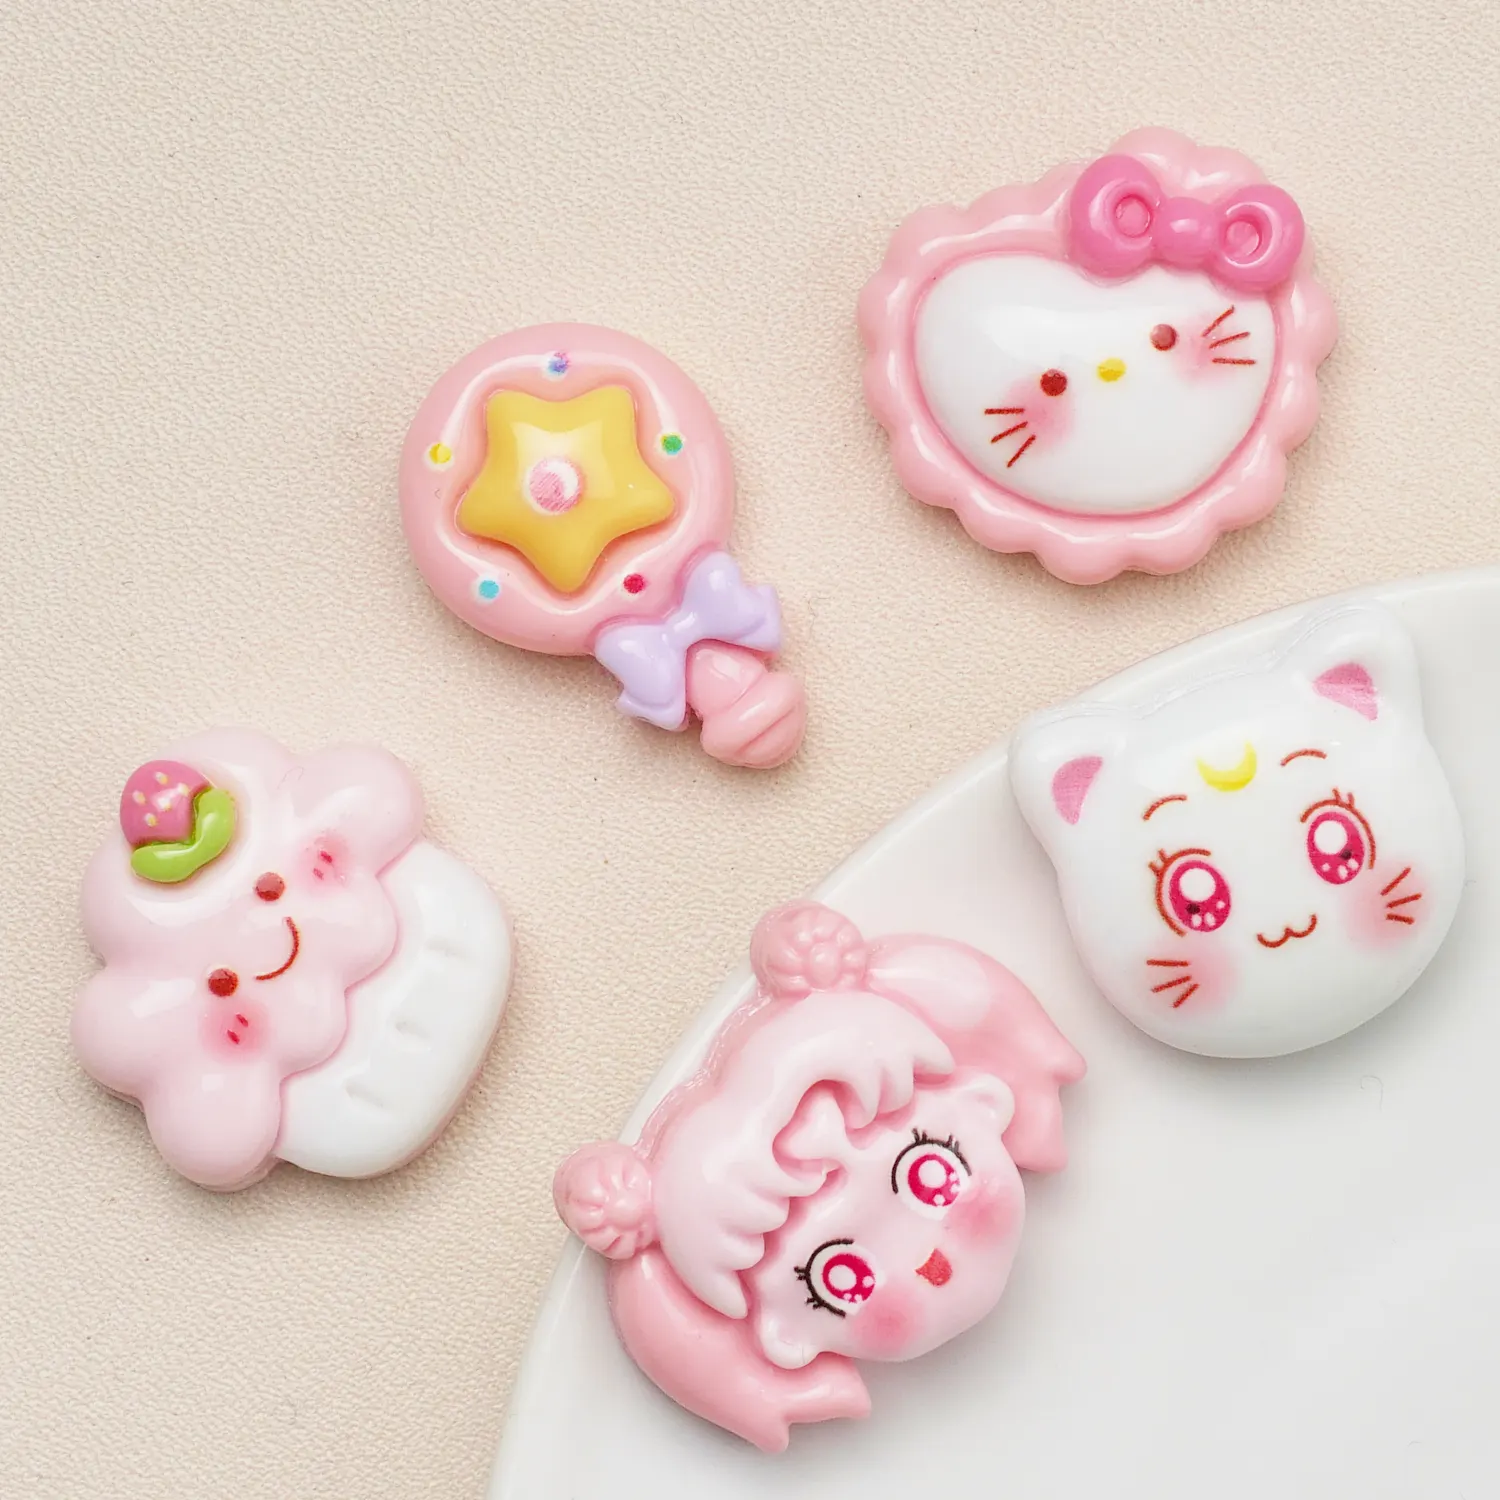 Kawaii Cartoon Girl Lovely Cat Resin Charms Accessories For Cell Phone Chain Pendant DIY Handmade Hairpin Making Party Decor